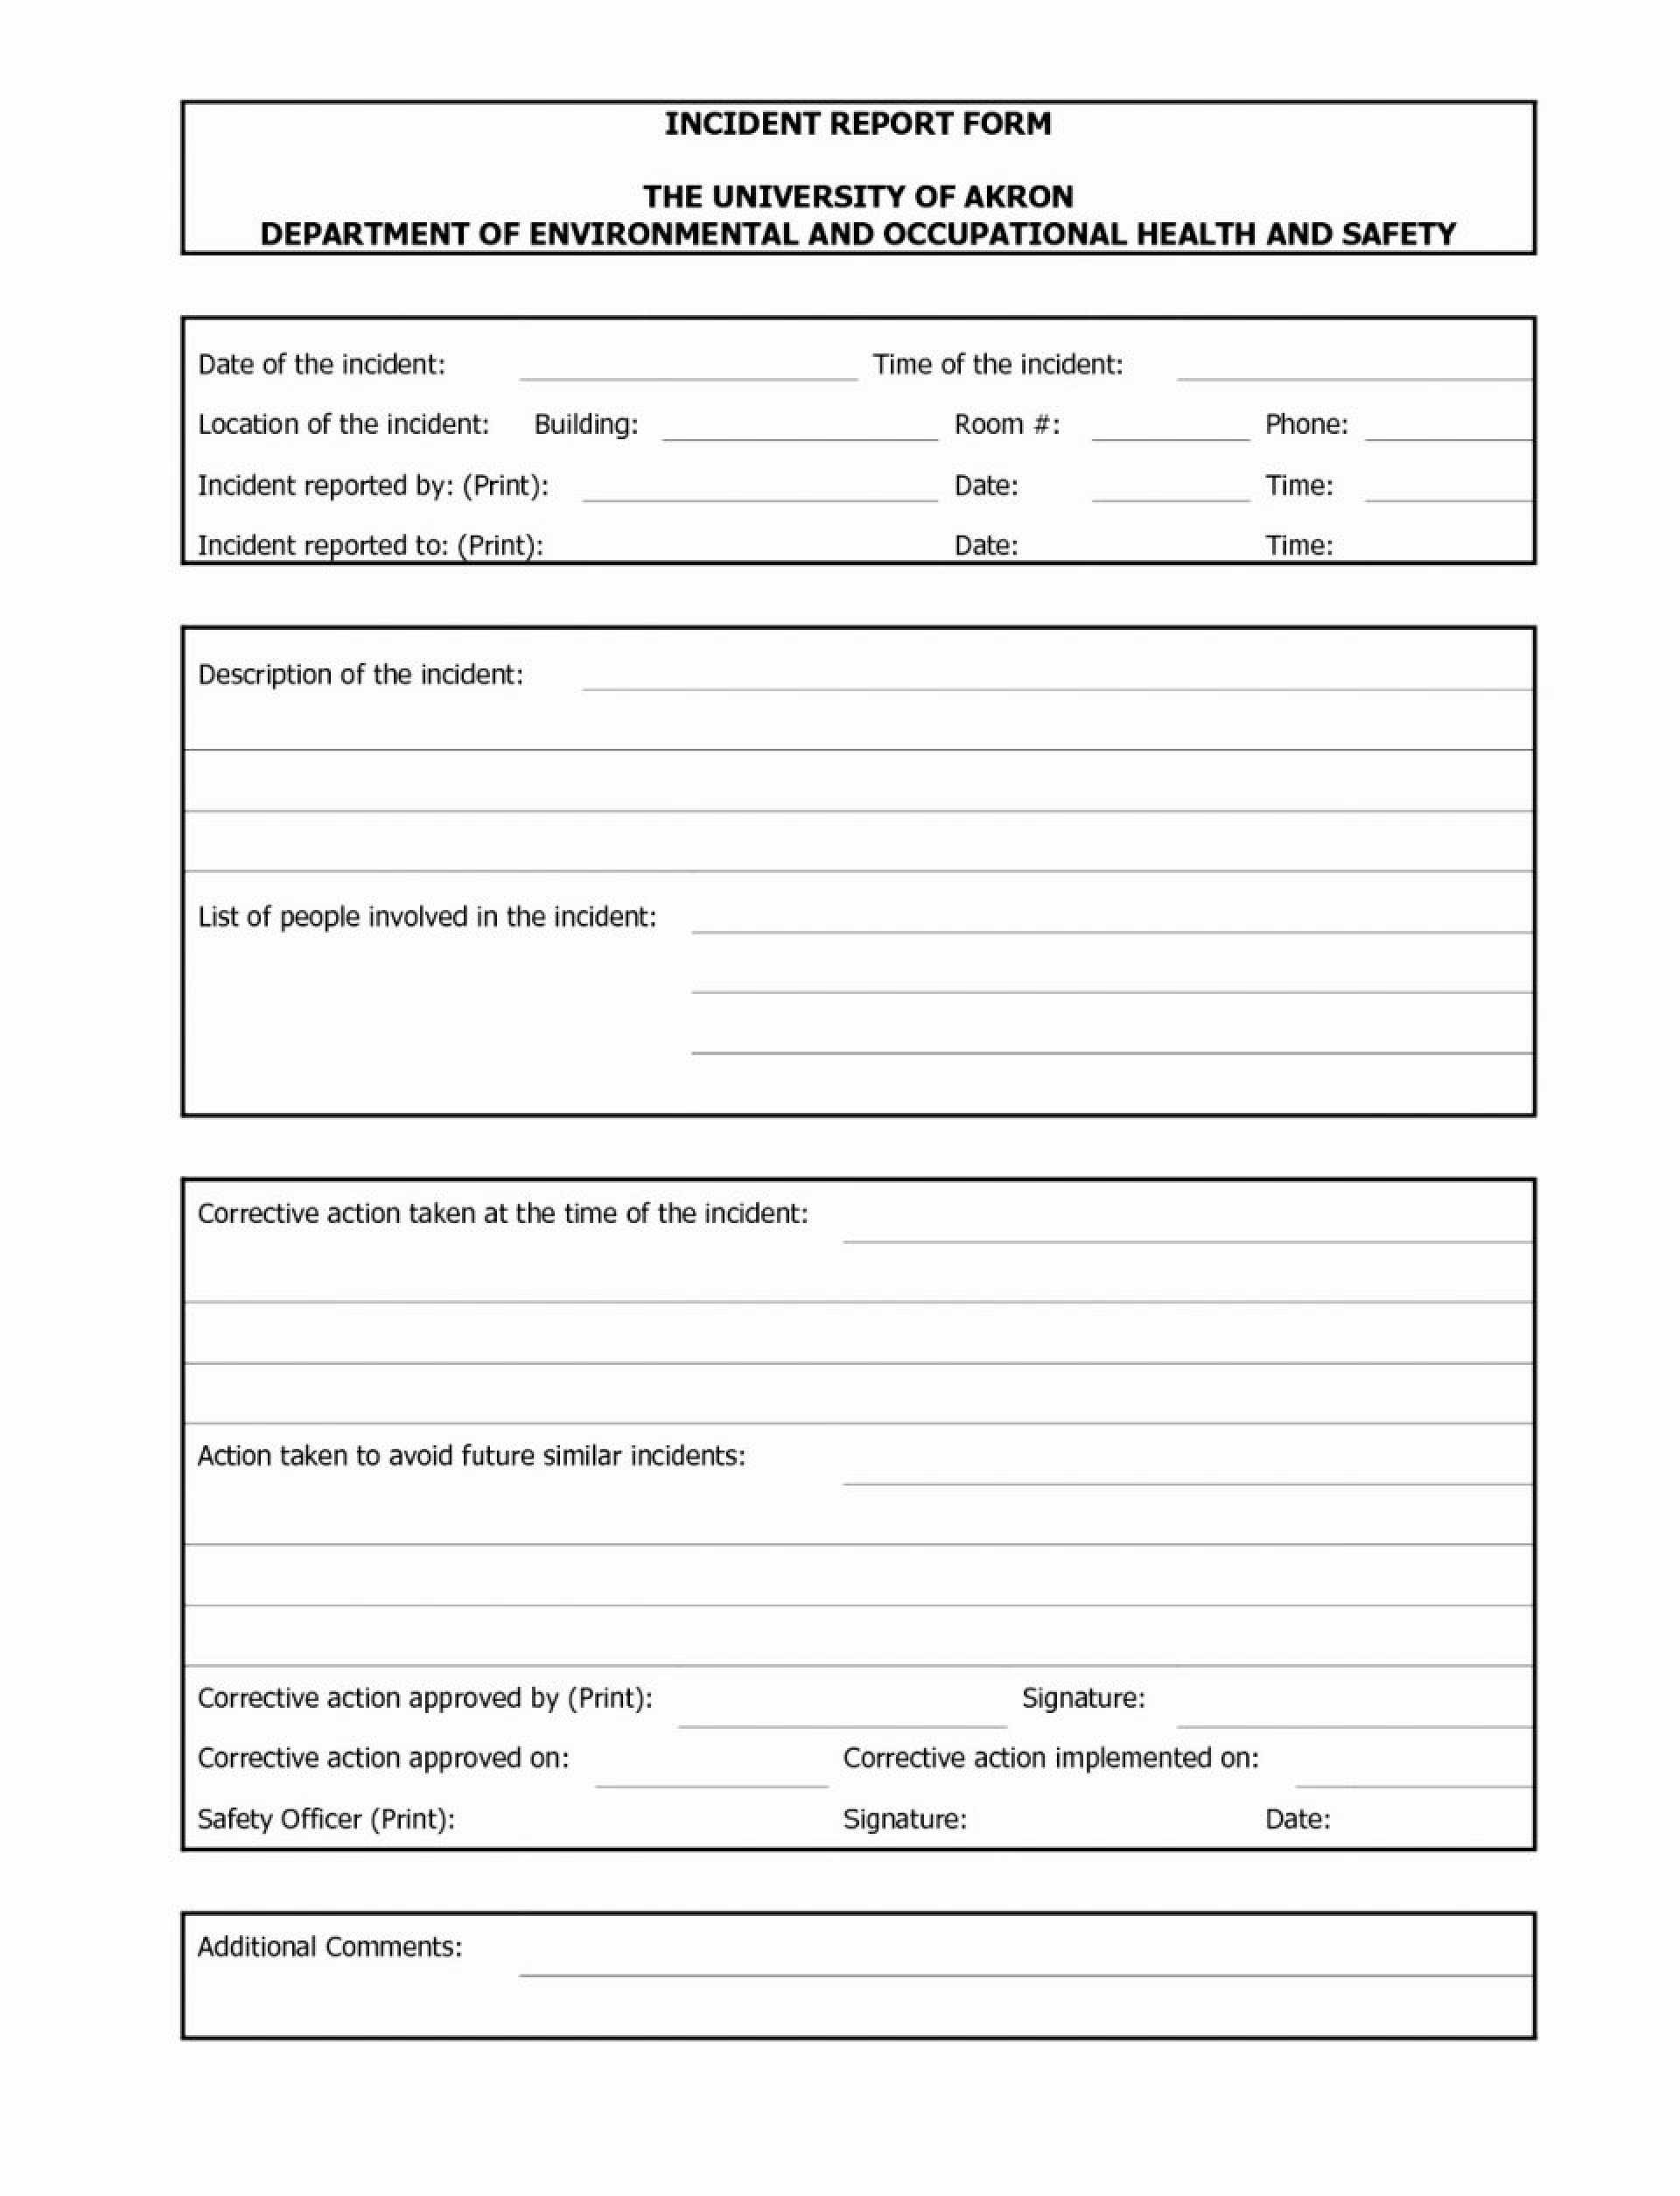 028 Incident Report Form Word Format Vehicle Accident In Health And Safety Incident Report Form Template